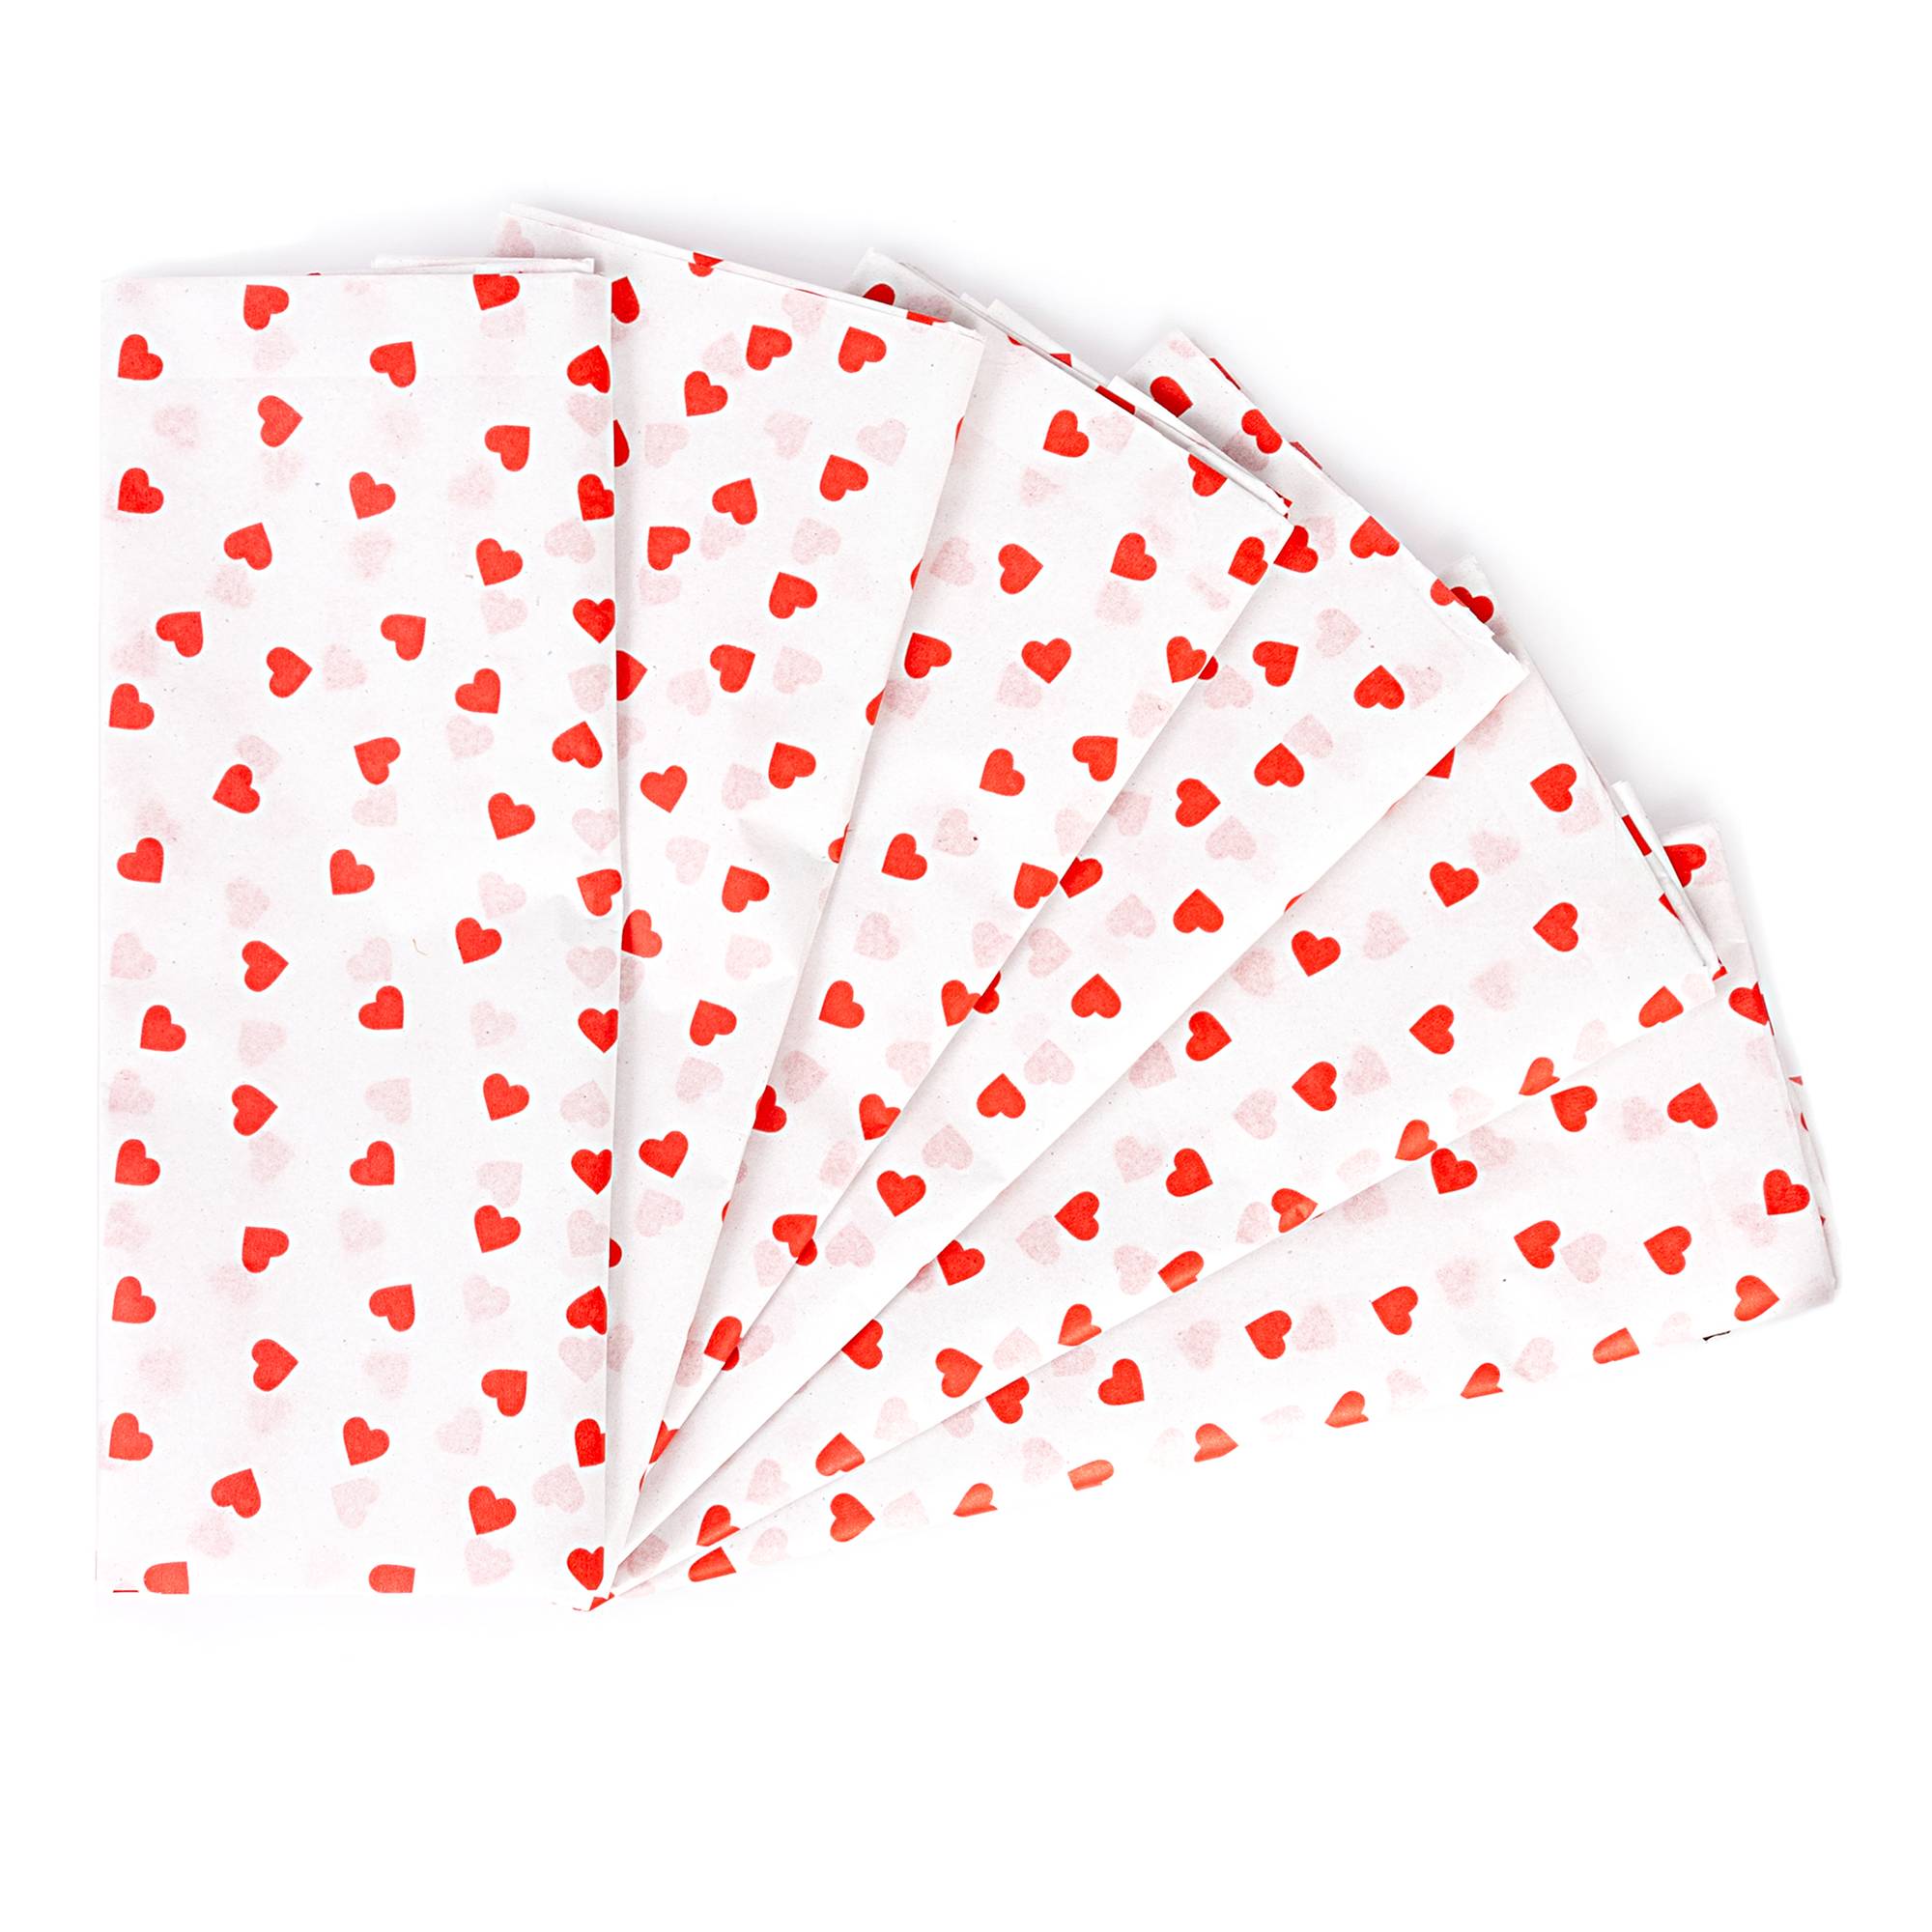 Hearts+Patterned+Tissue+Paper+from+stock+at+Midpac+Packaging.+White+Tissue+Paper+printed+with+a+red+heart+pattern+across+each+sheet.